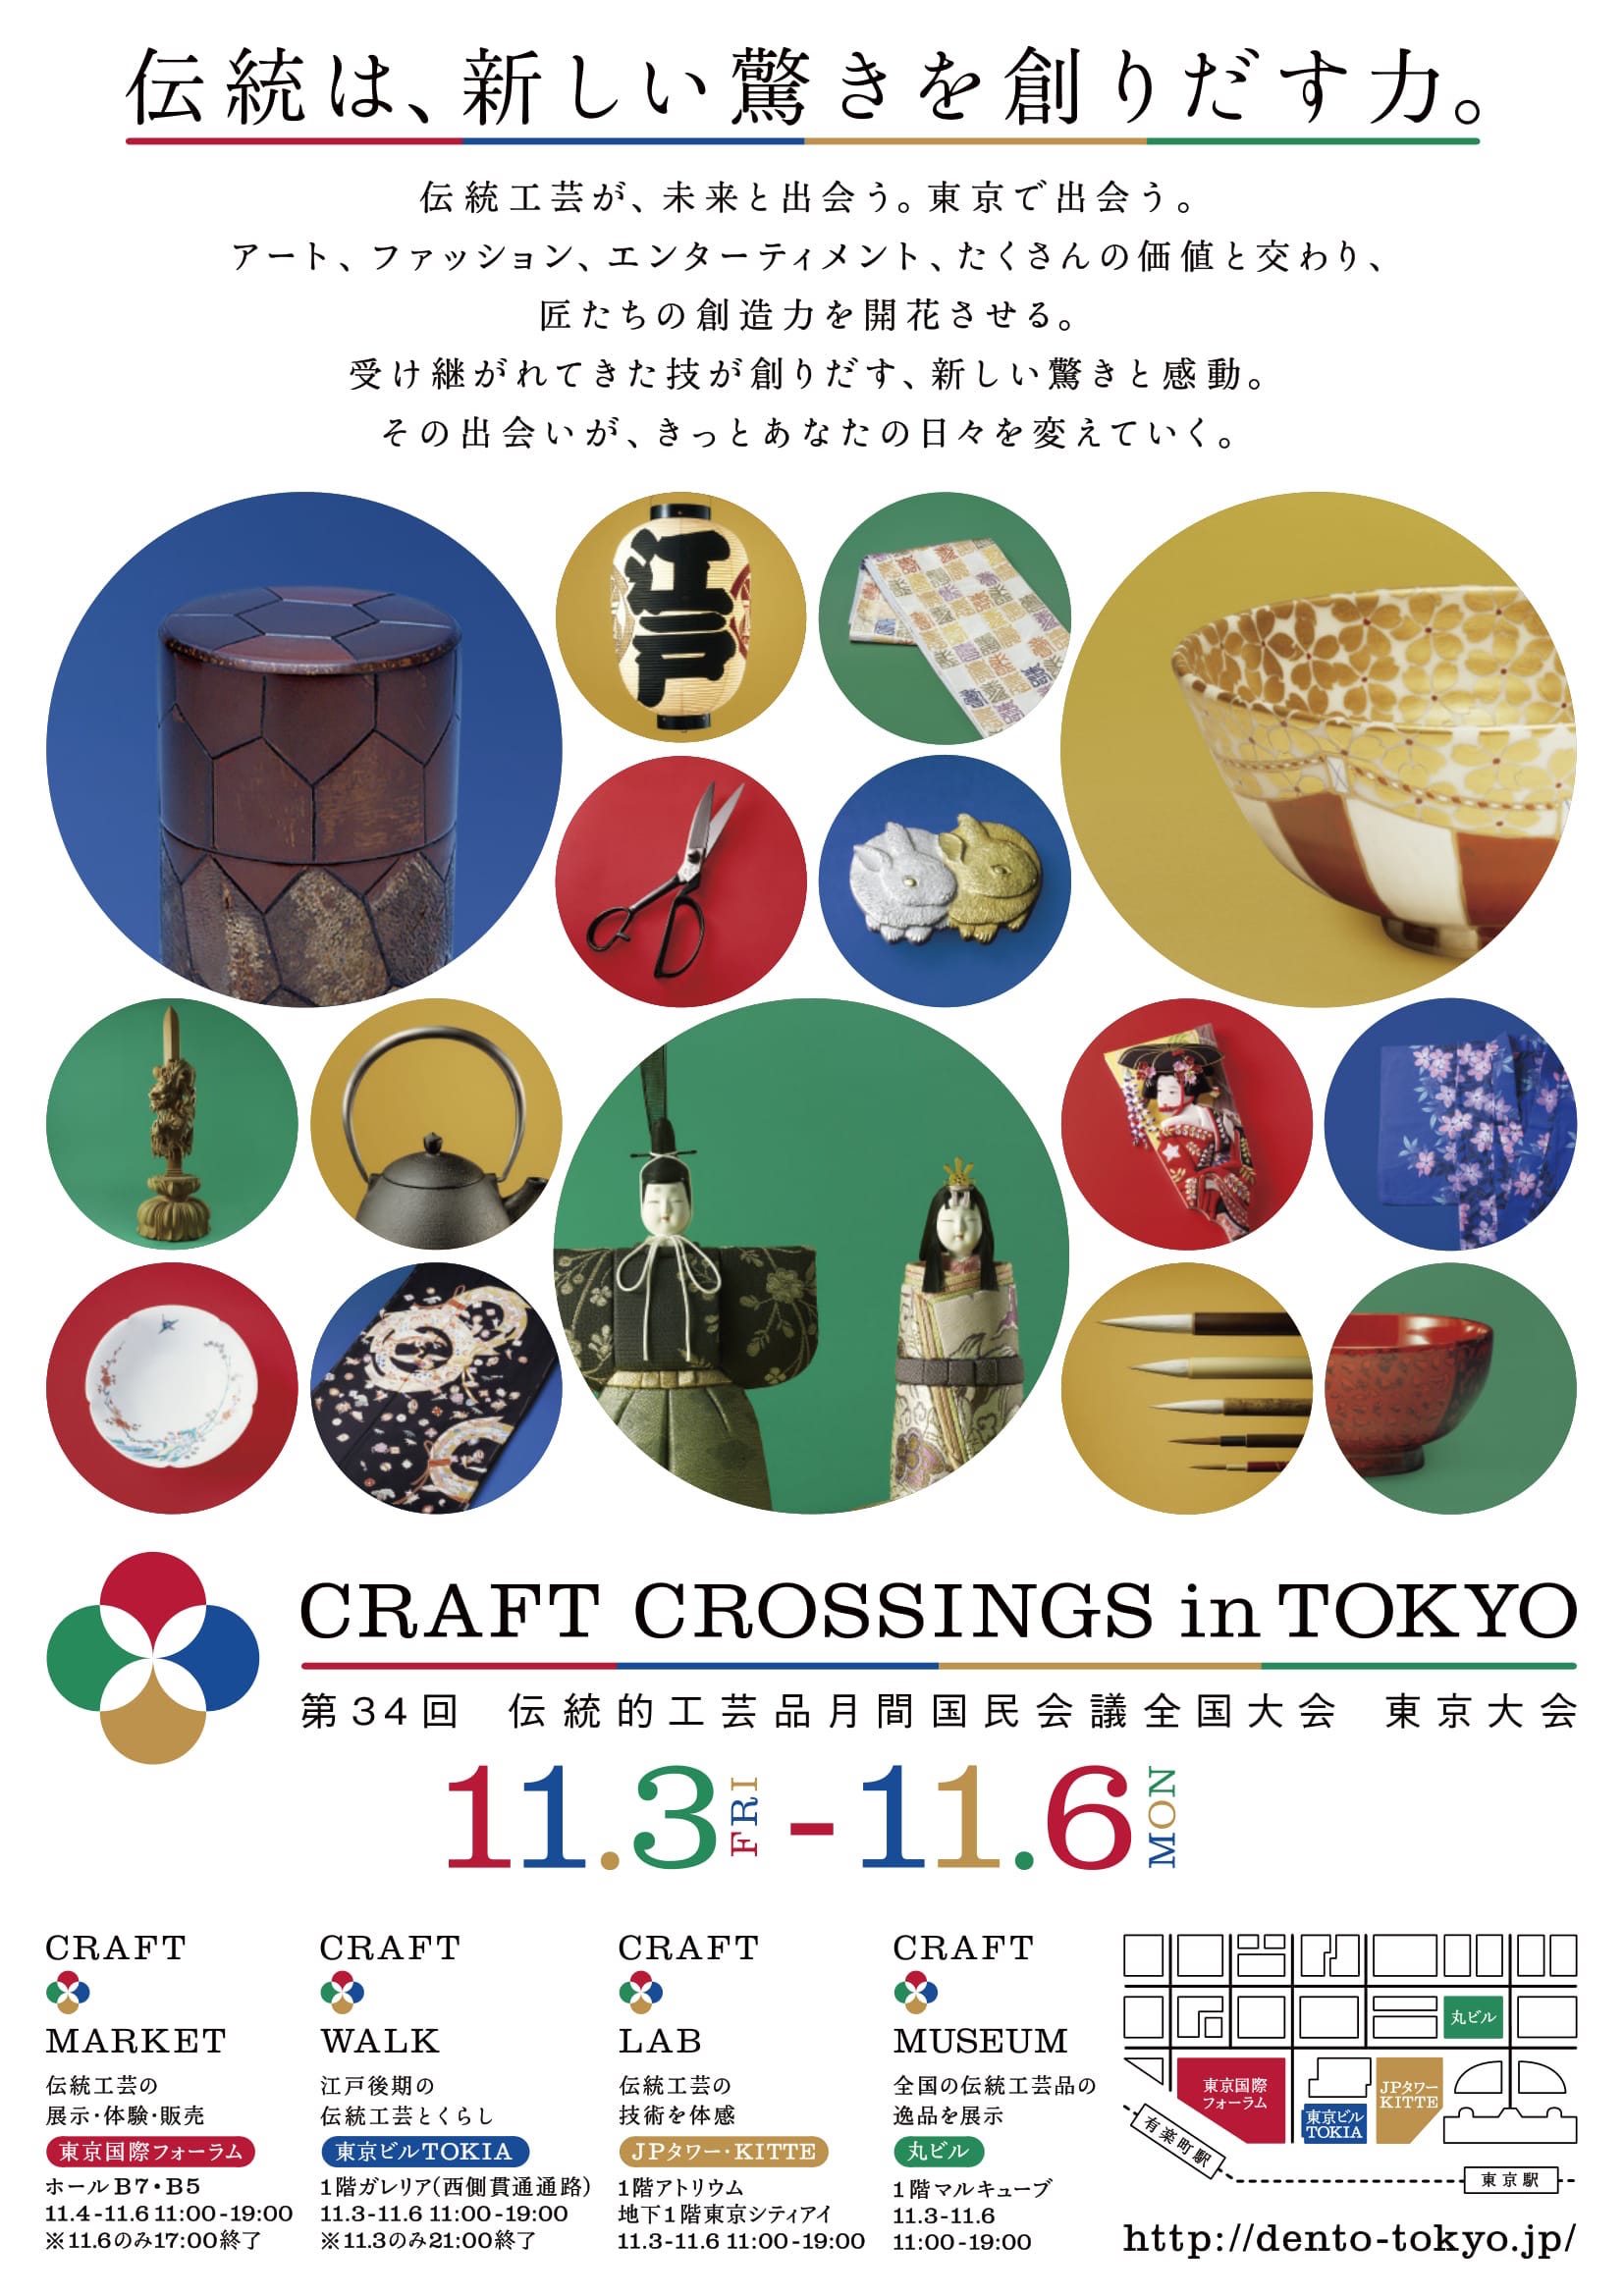 Exhibition to celebrate Japanese traditional arts and crafts - Japan Today